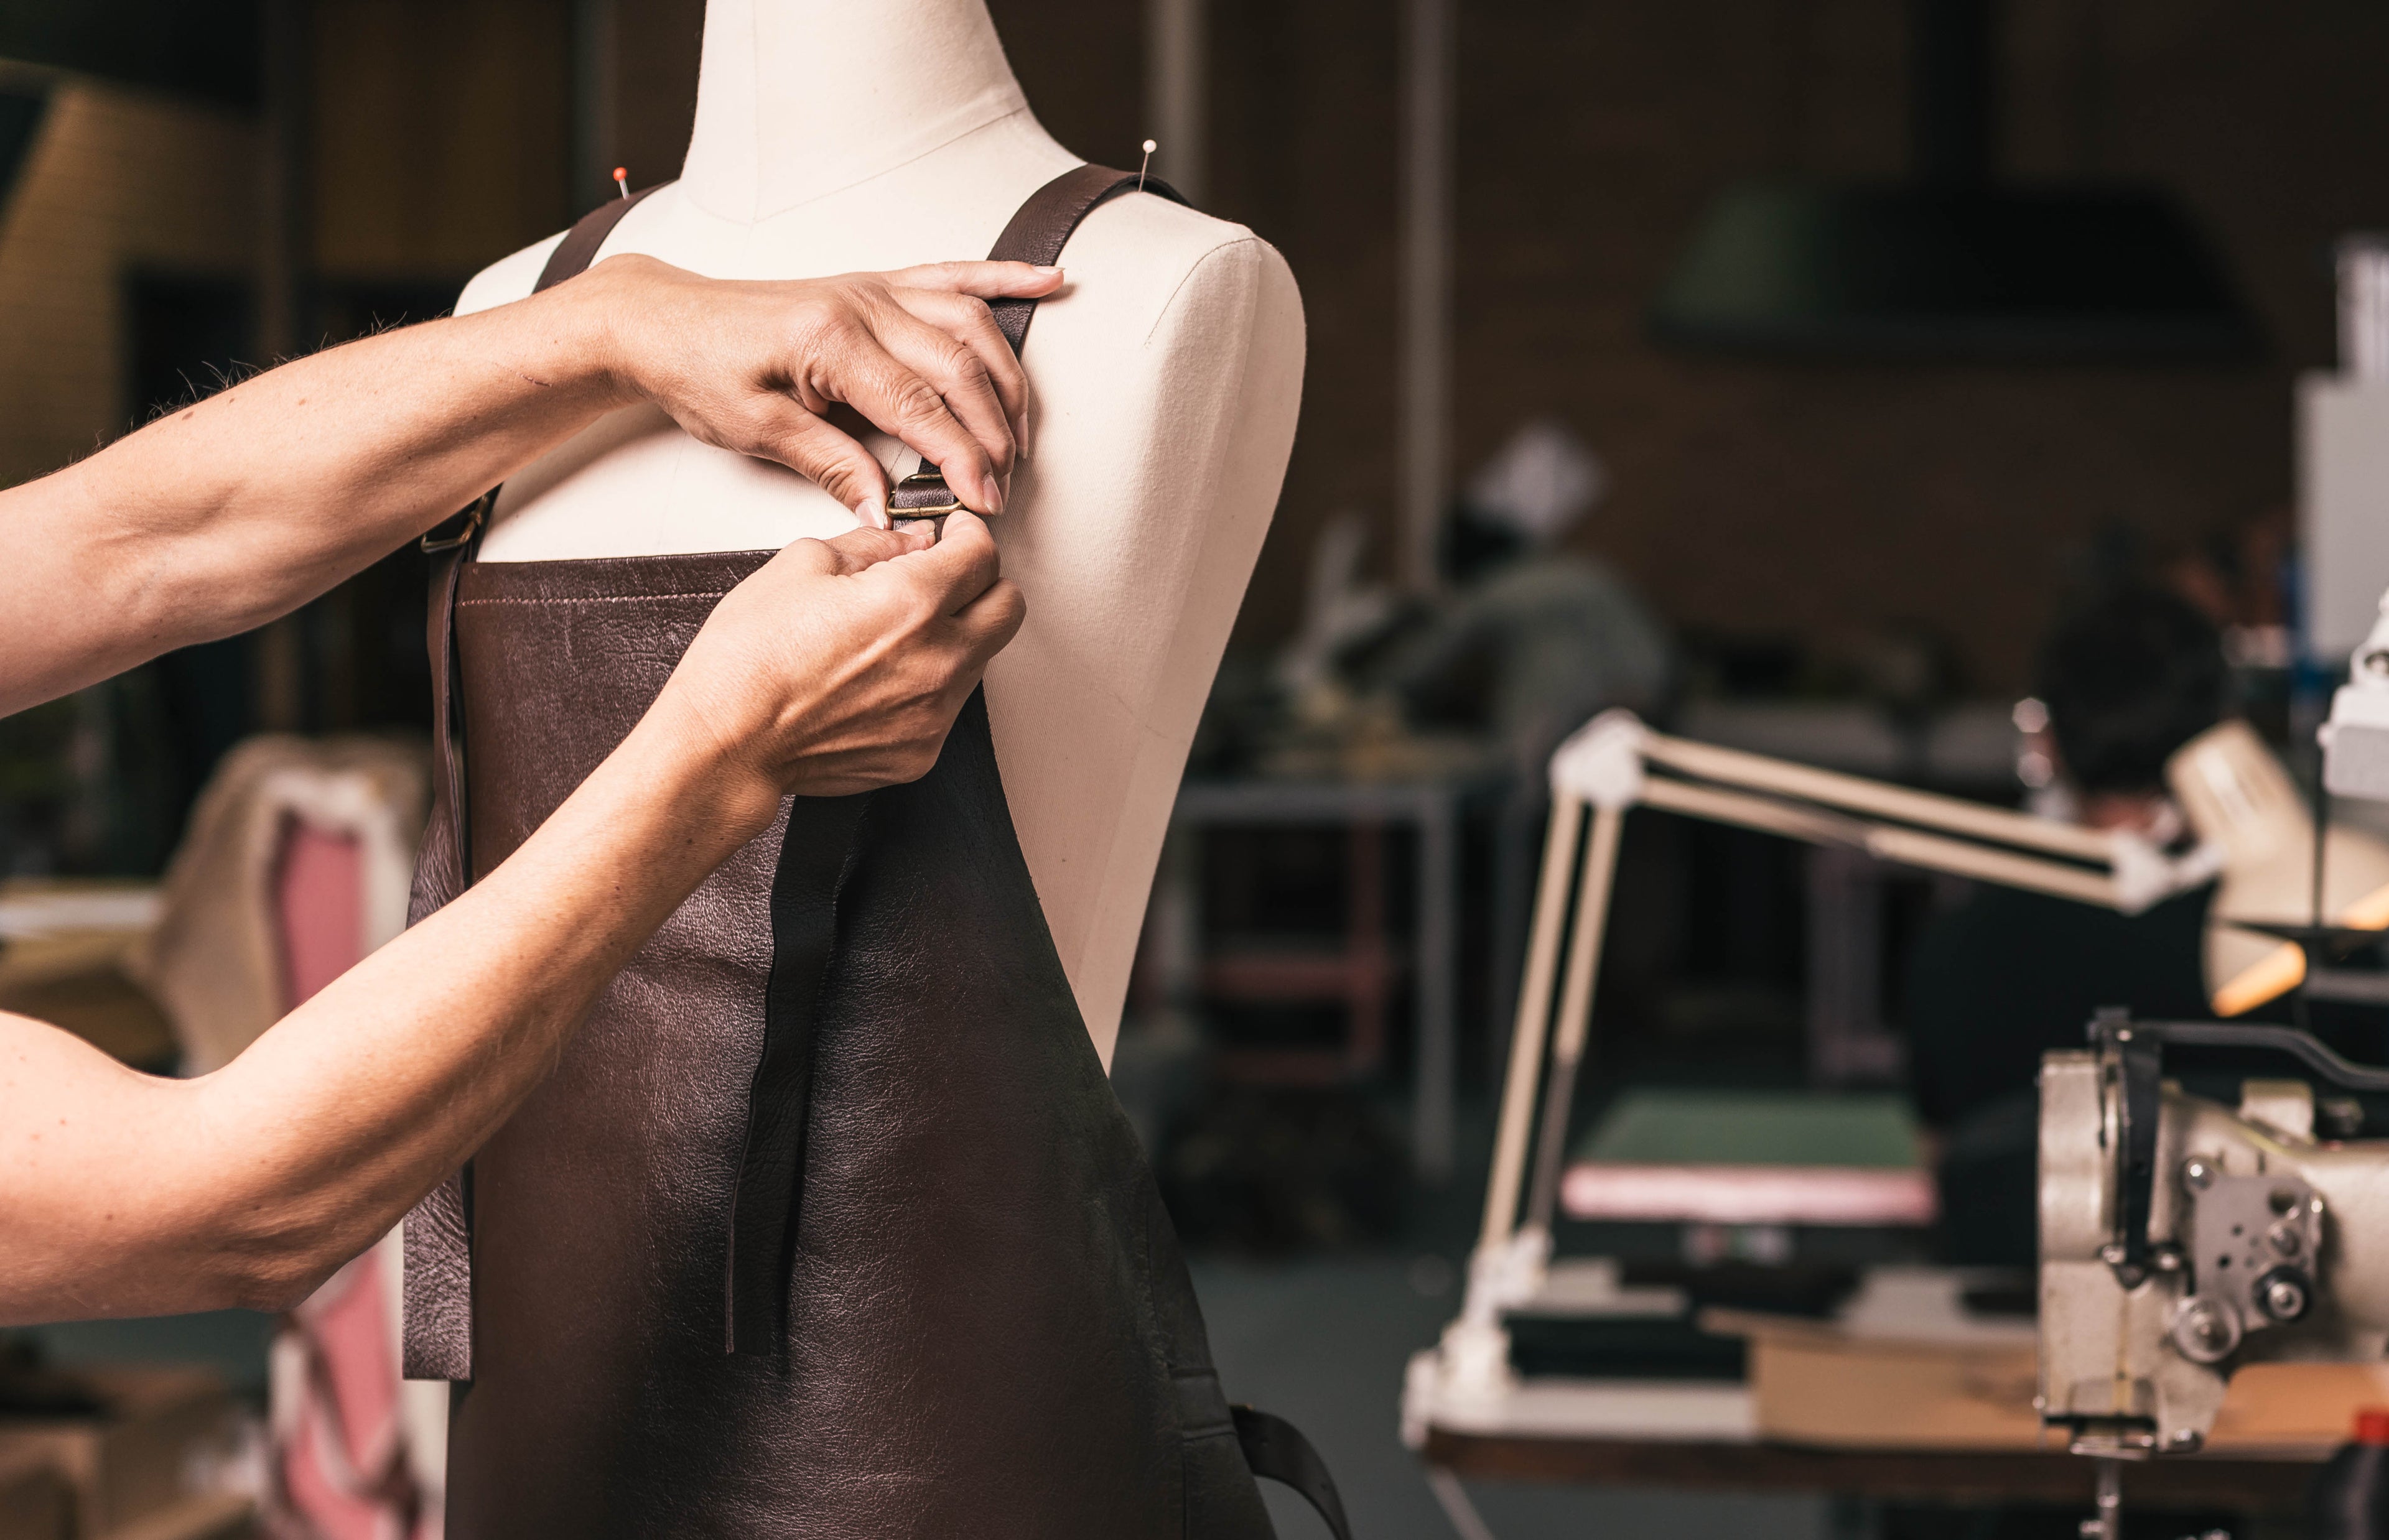 Load video: Why chose Kangaroo leather handcrafted aprons by Karmine Leather